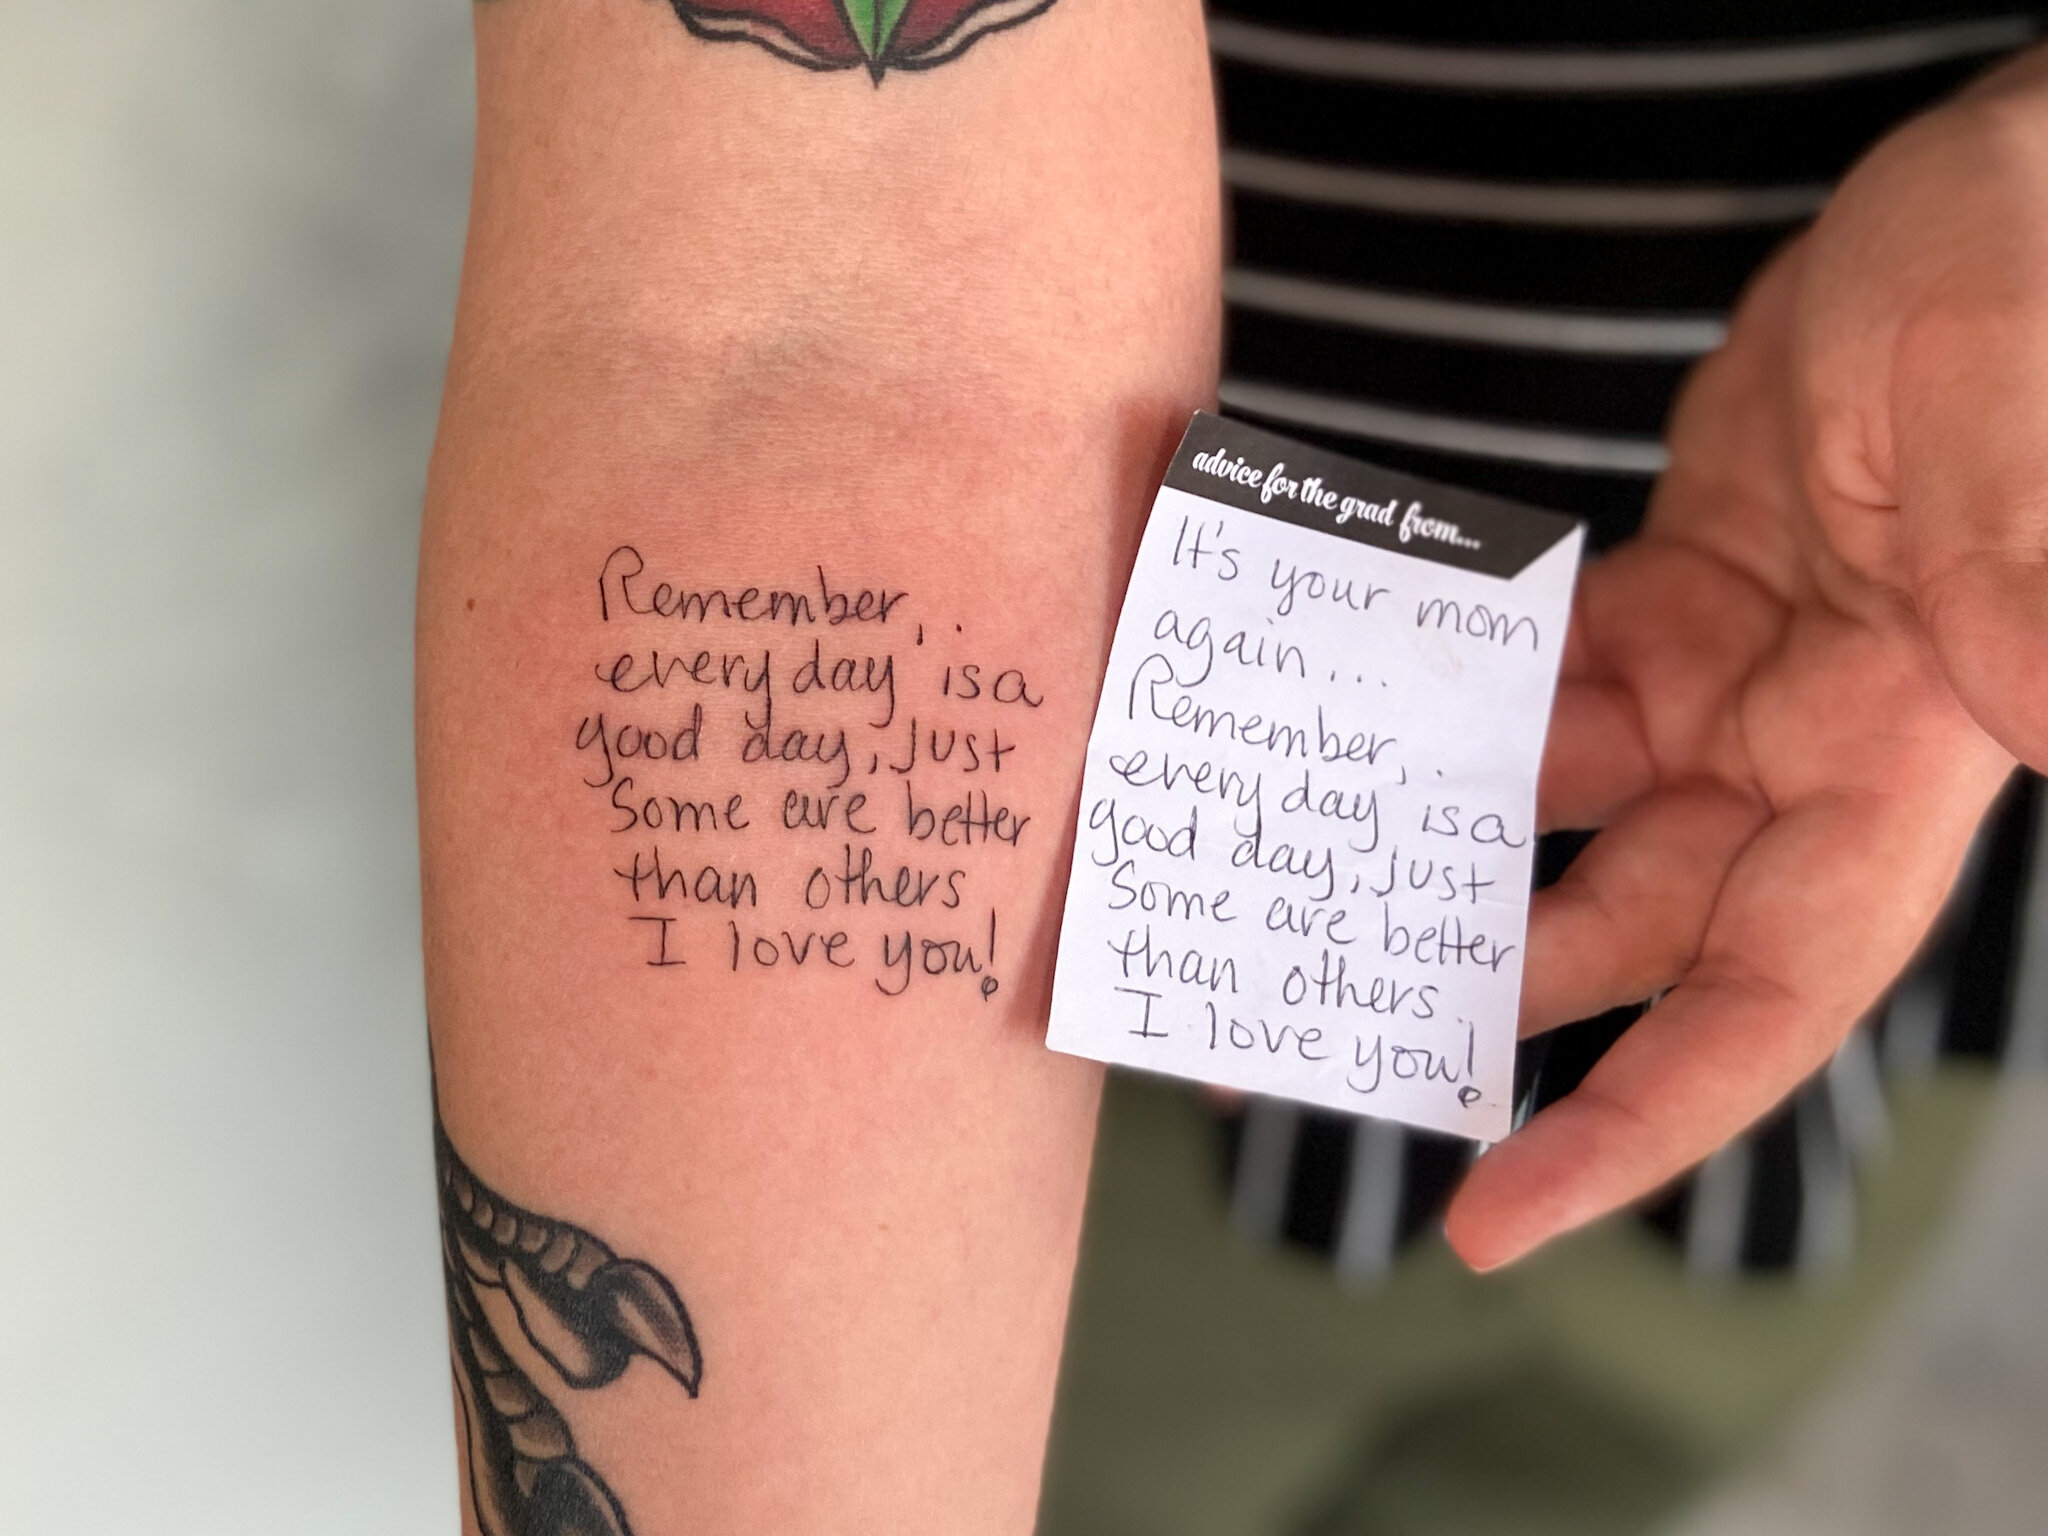  tattoo of a handwritten note by their mom. note is written on a sticky note paper and held next to the tattoo of the handwriting on a forearm with beige skin tone.   